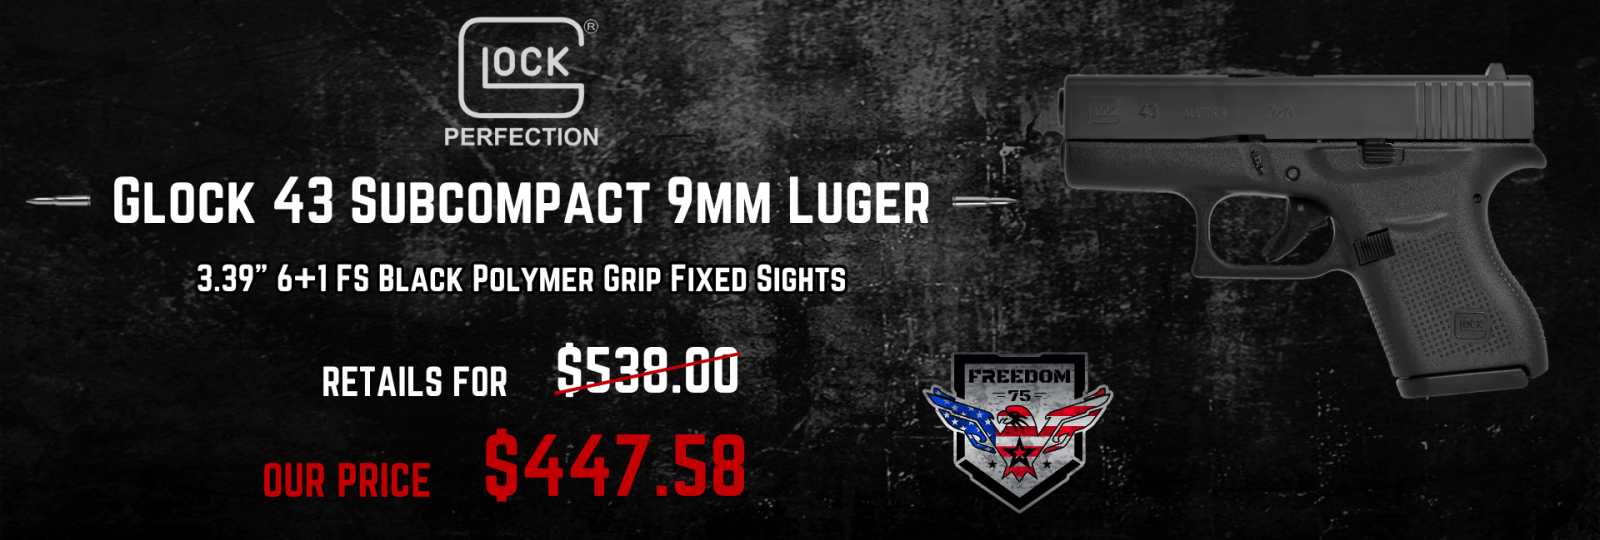 glock 43 subcompact 9mm luger banner